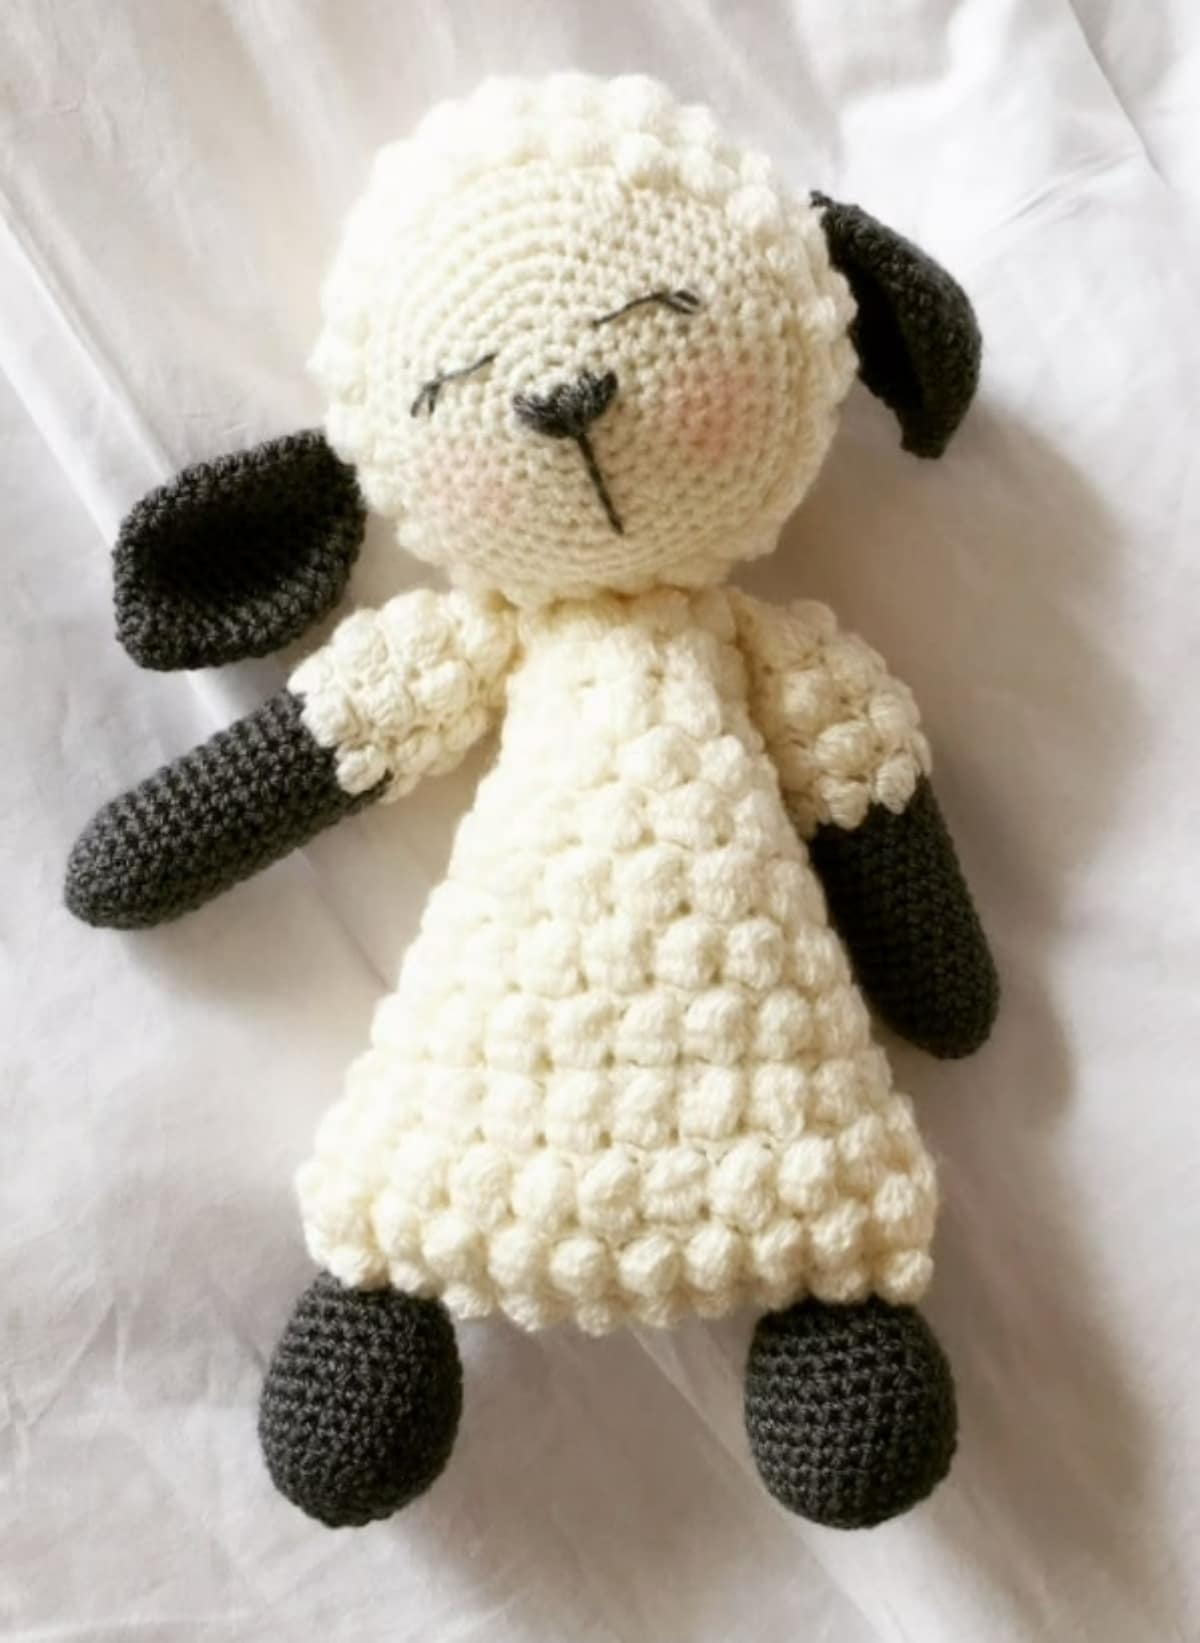 Small crochet lamb with white bobbles over its body and black ears and legs asleep on a white blanket.